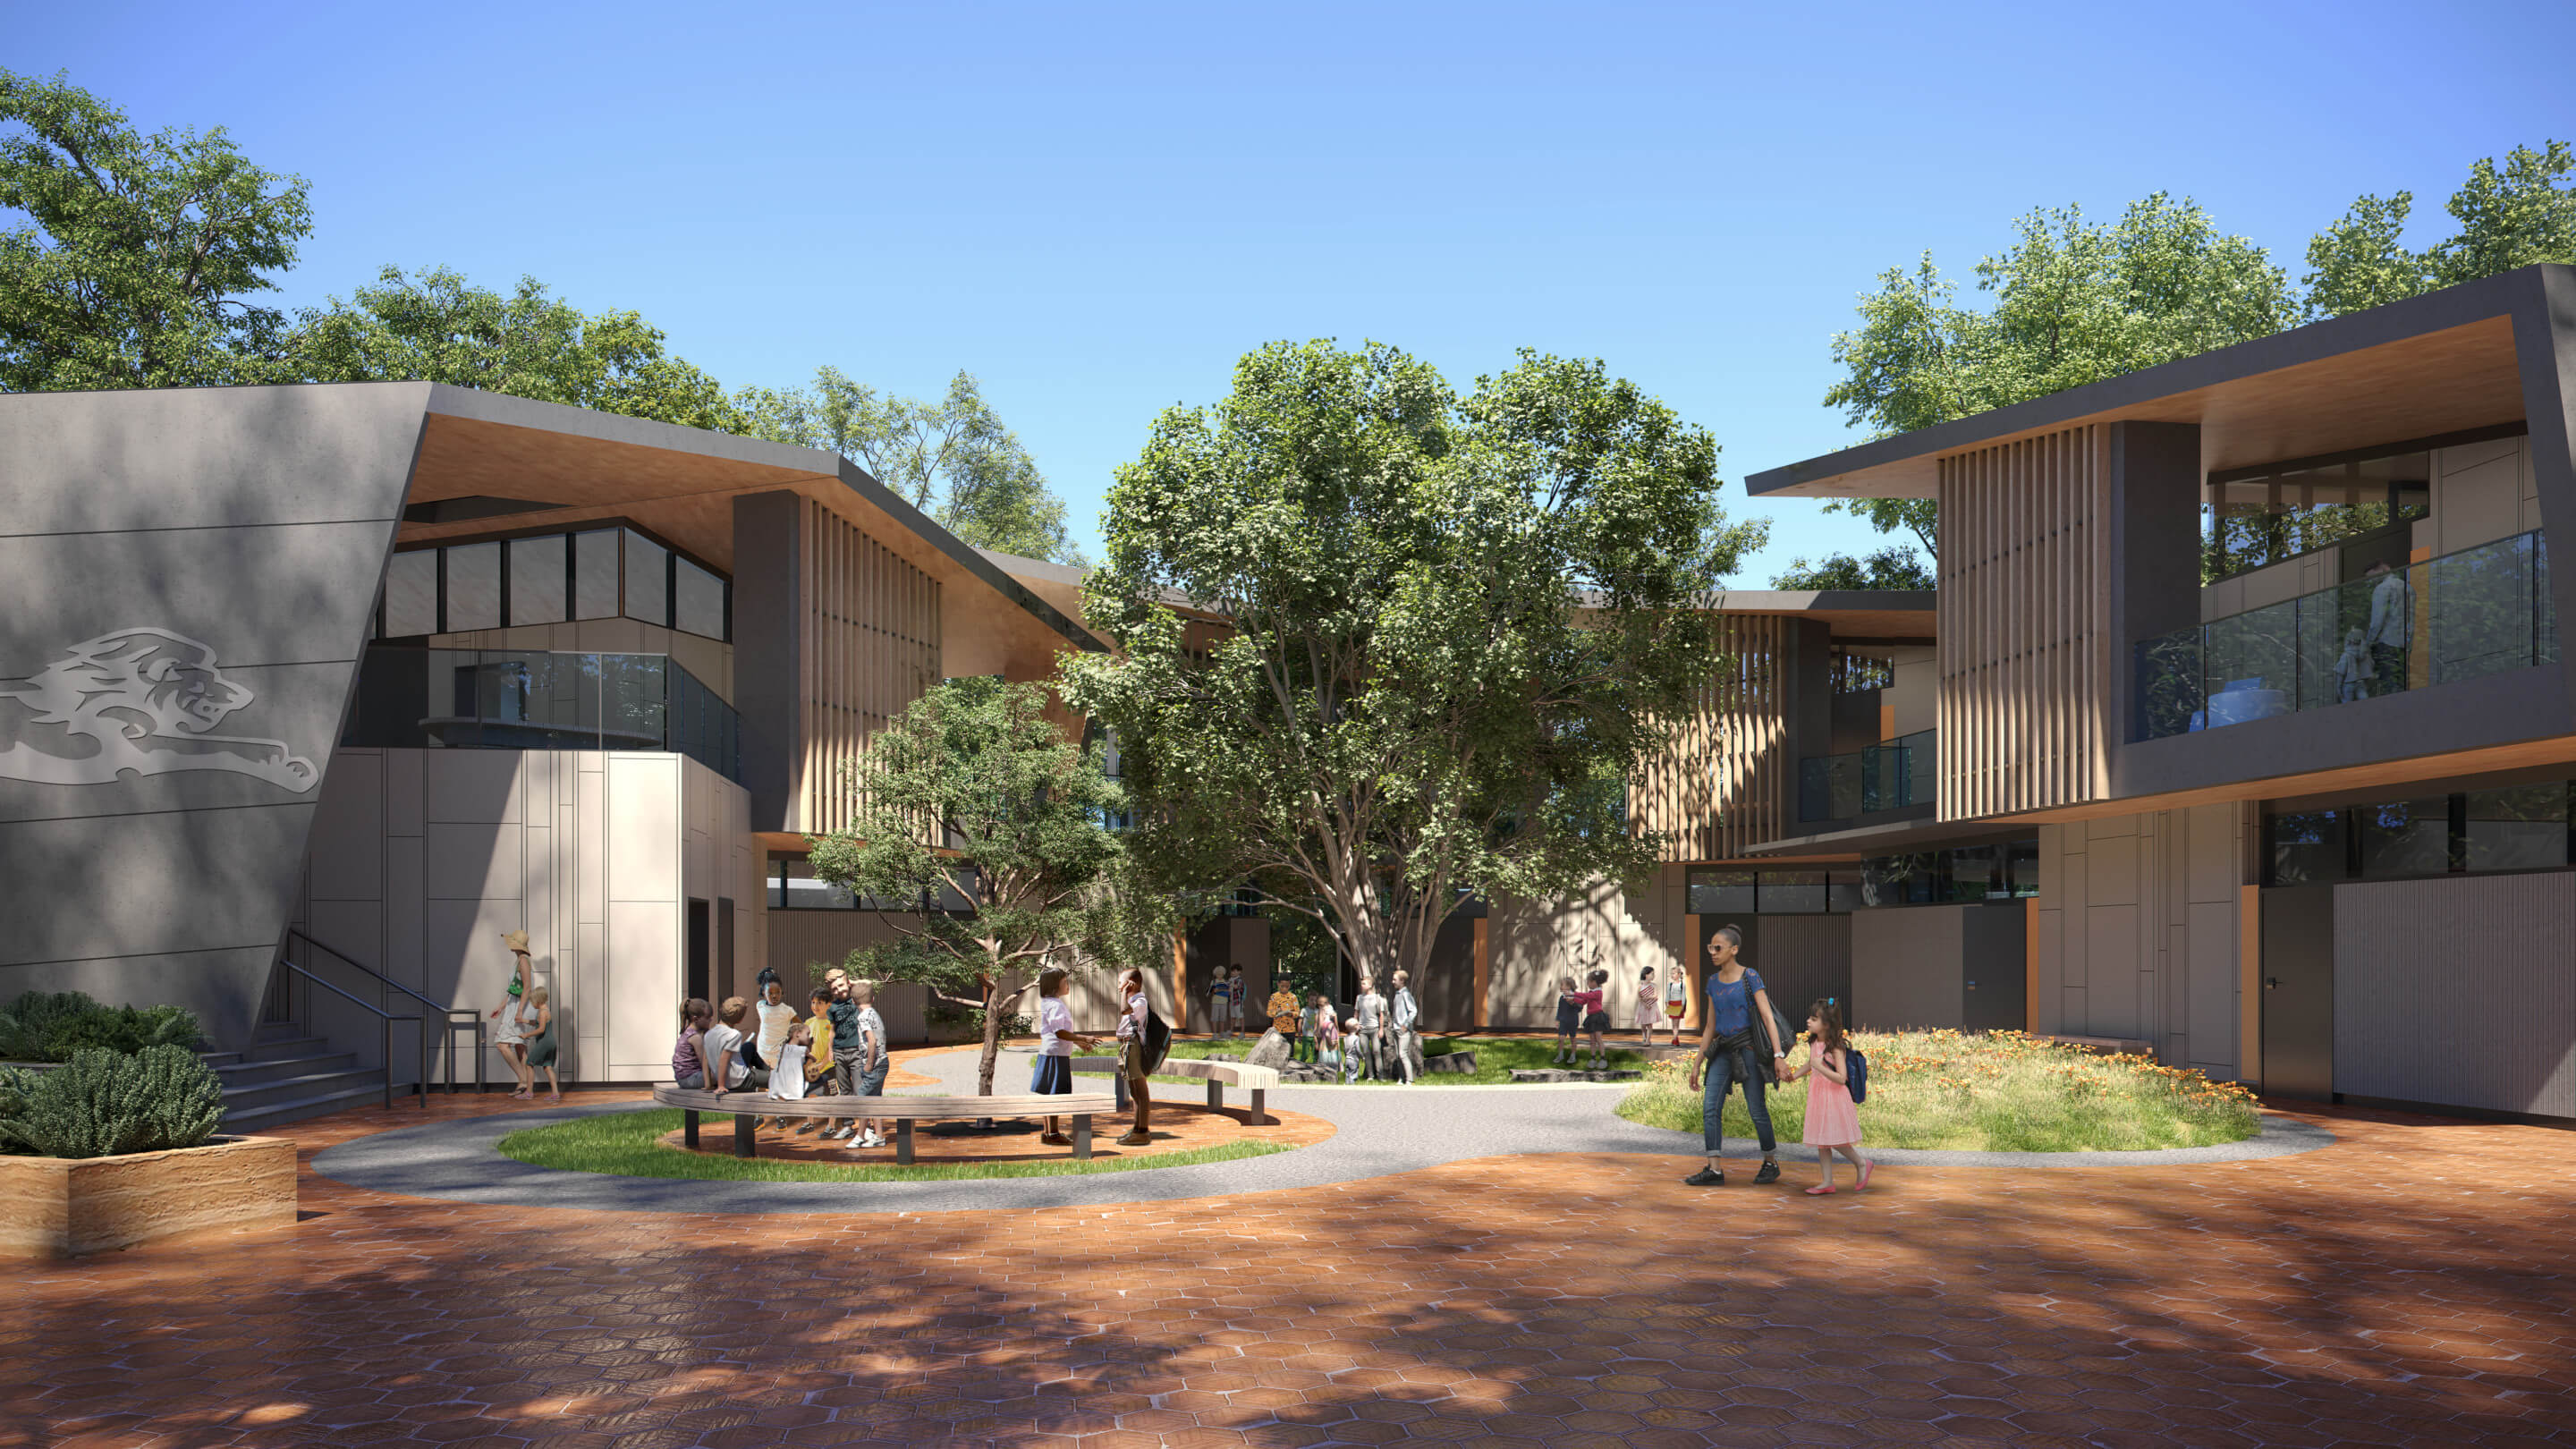 rendering of an open primary school campus with a tree-anchored courtyard